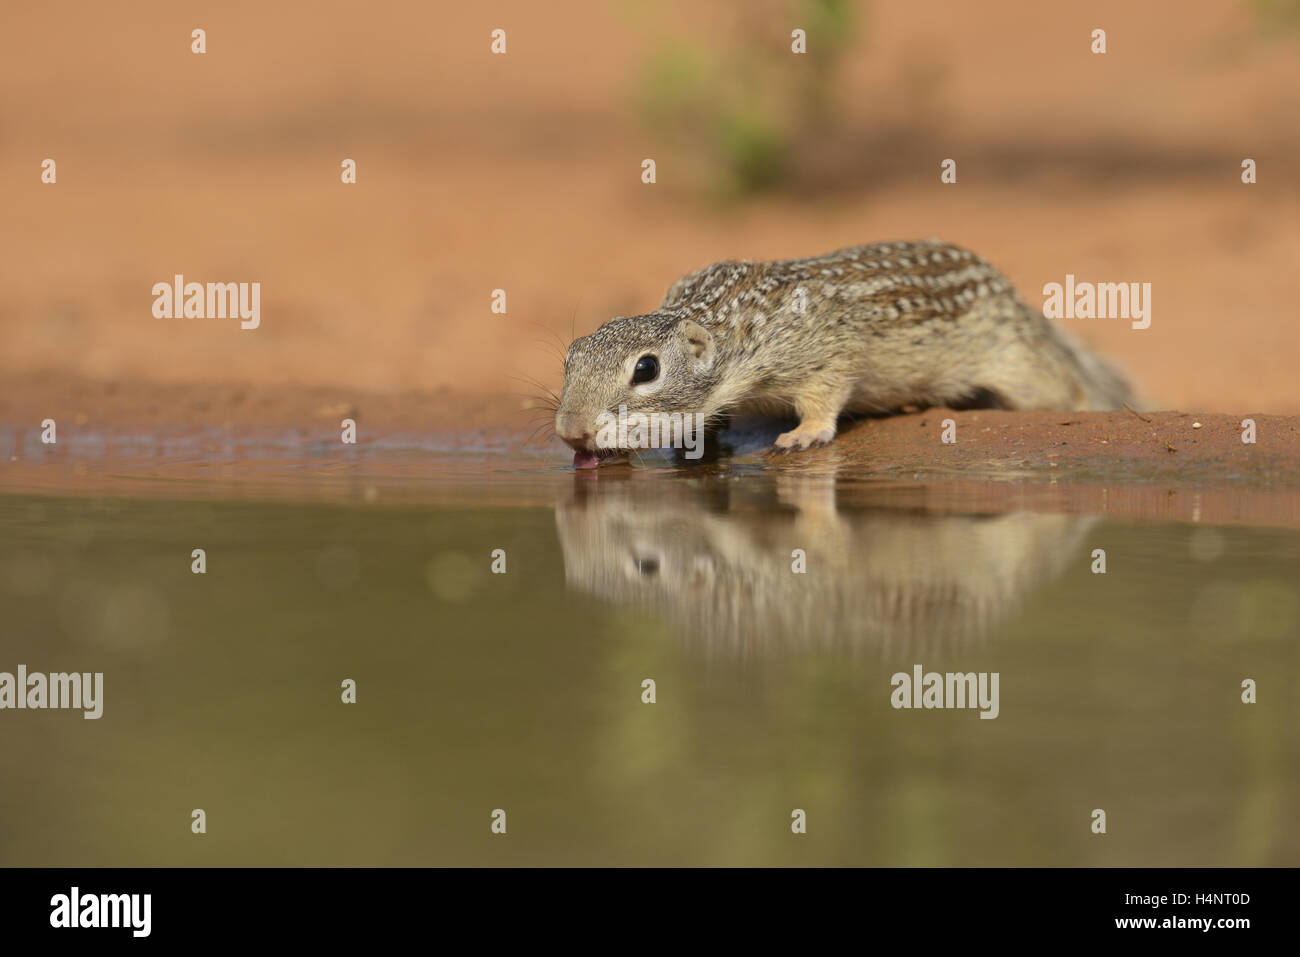 Mexican Ground Squirrel (Spermophilus mexicanus), adult drinking at pond, South Texas, USA Stock Photo